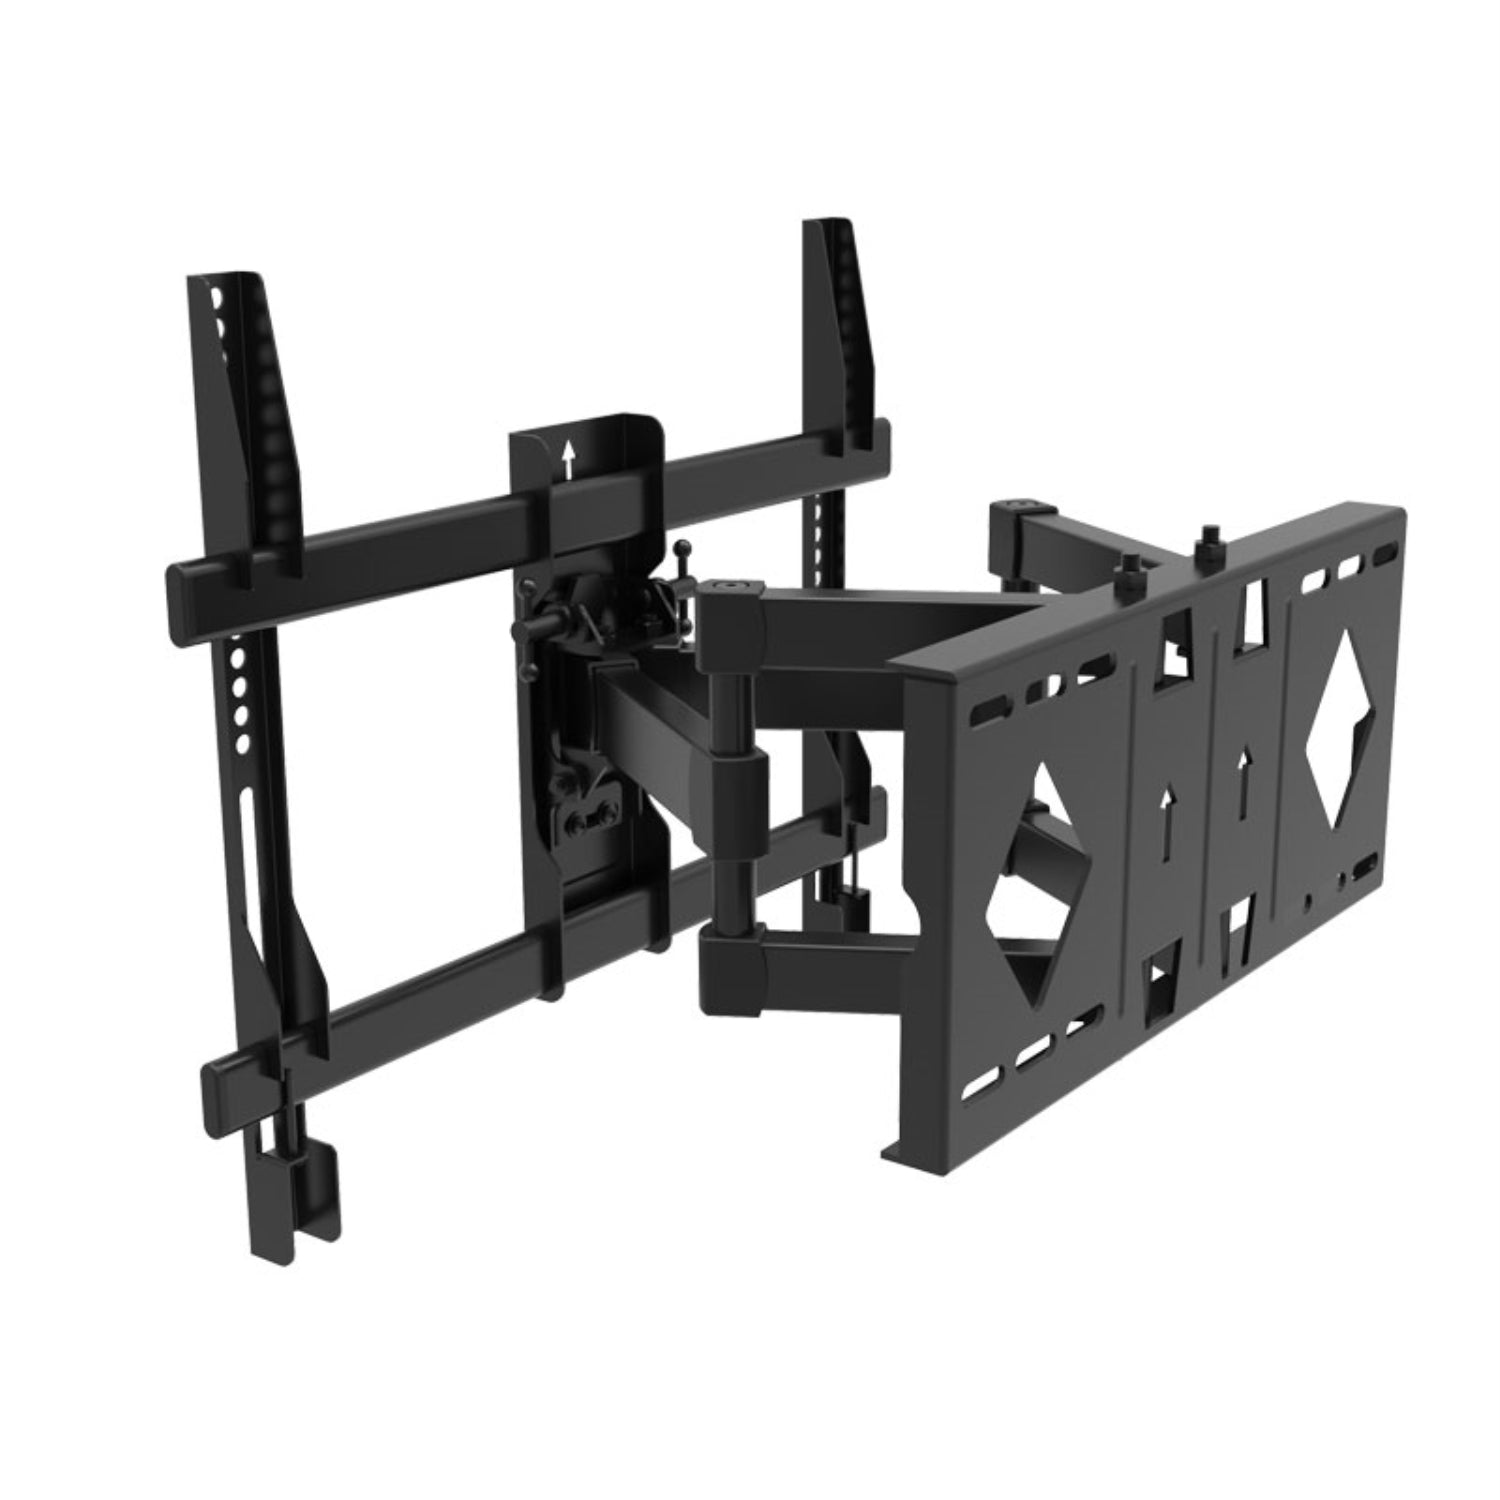 ViscoLogic Clench Adjustable Articulating TV Wall Mount Suitable for 32